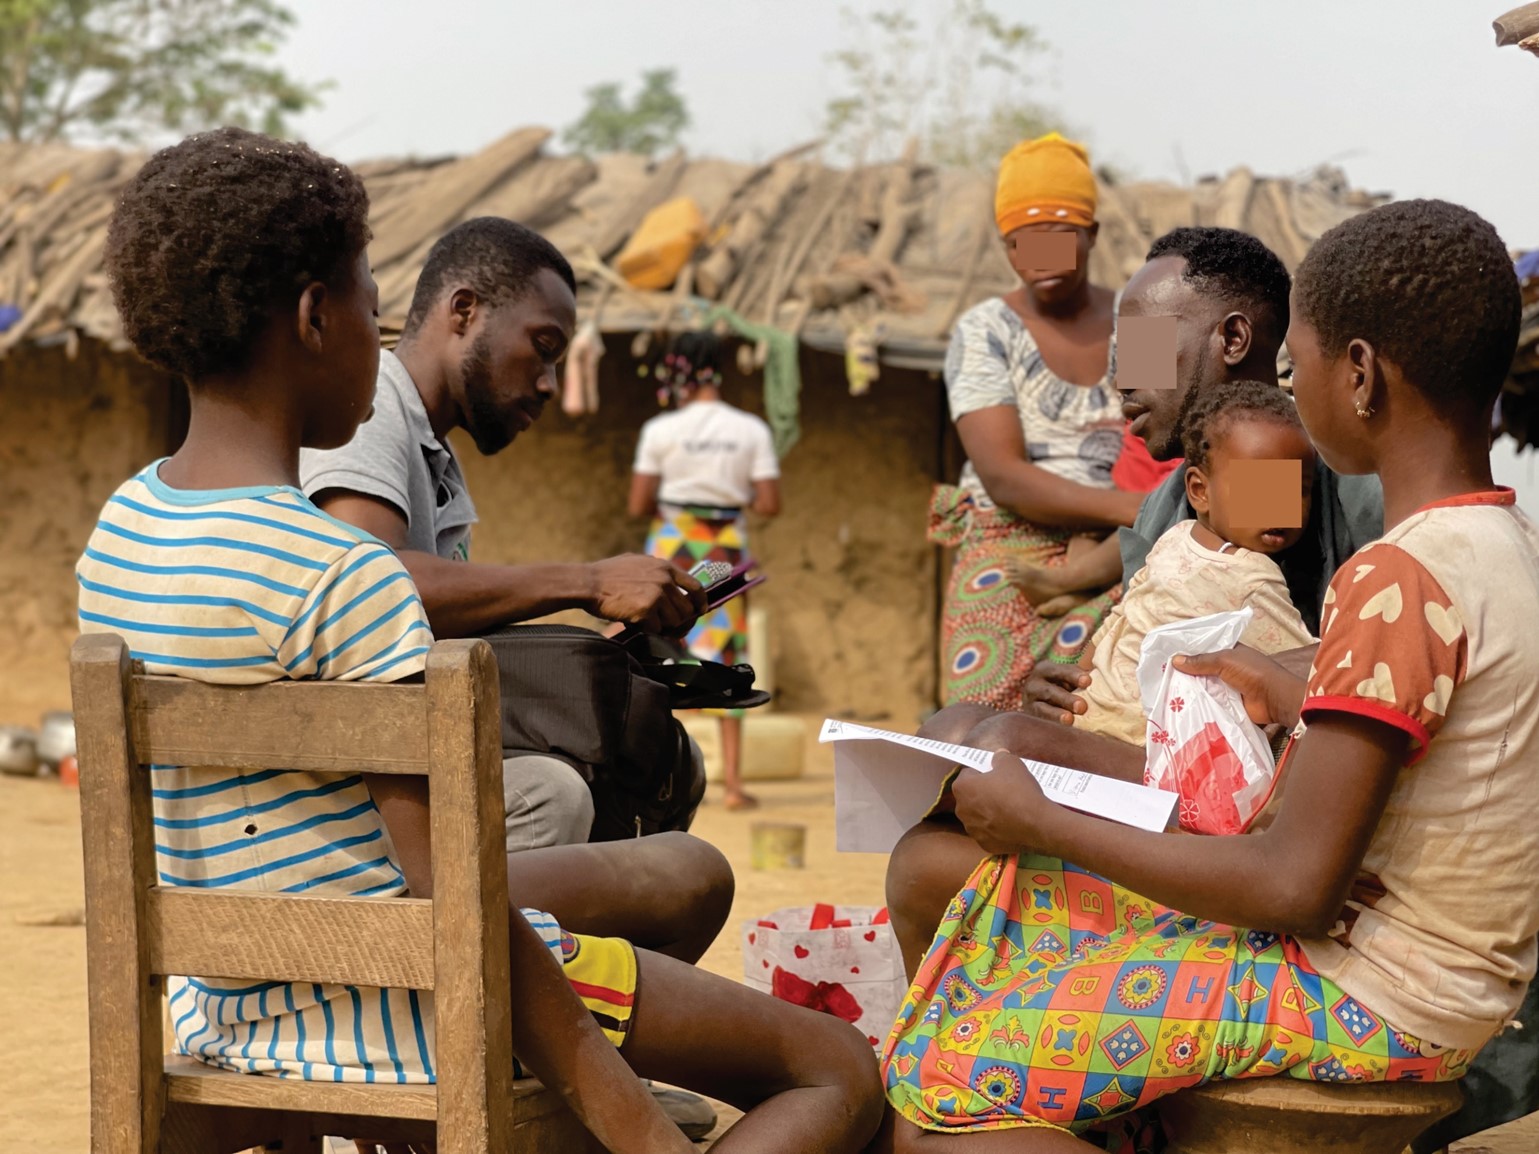 SHARP Formative study:  Field activity at Gyereso, Nyinahin District, Ashanti Region. Mr. Daniel Okyere, a Research Assistant from NMIMR interviewing a caregiver in the presence of the affected child.